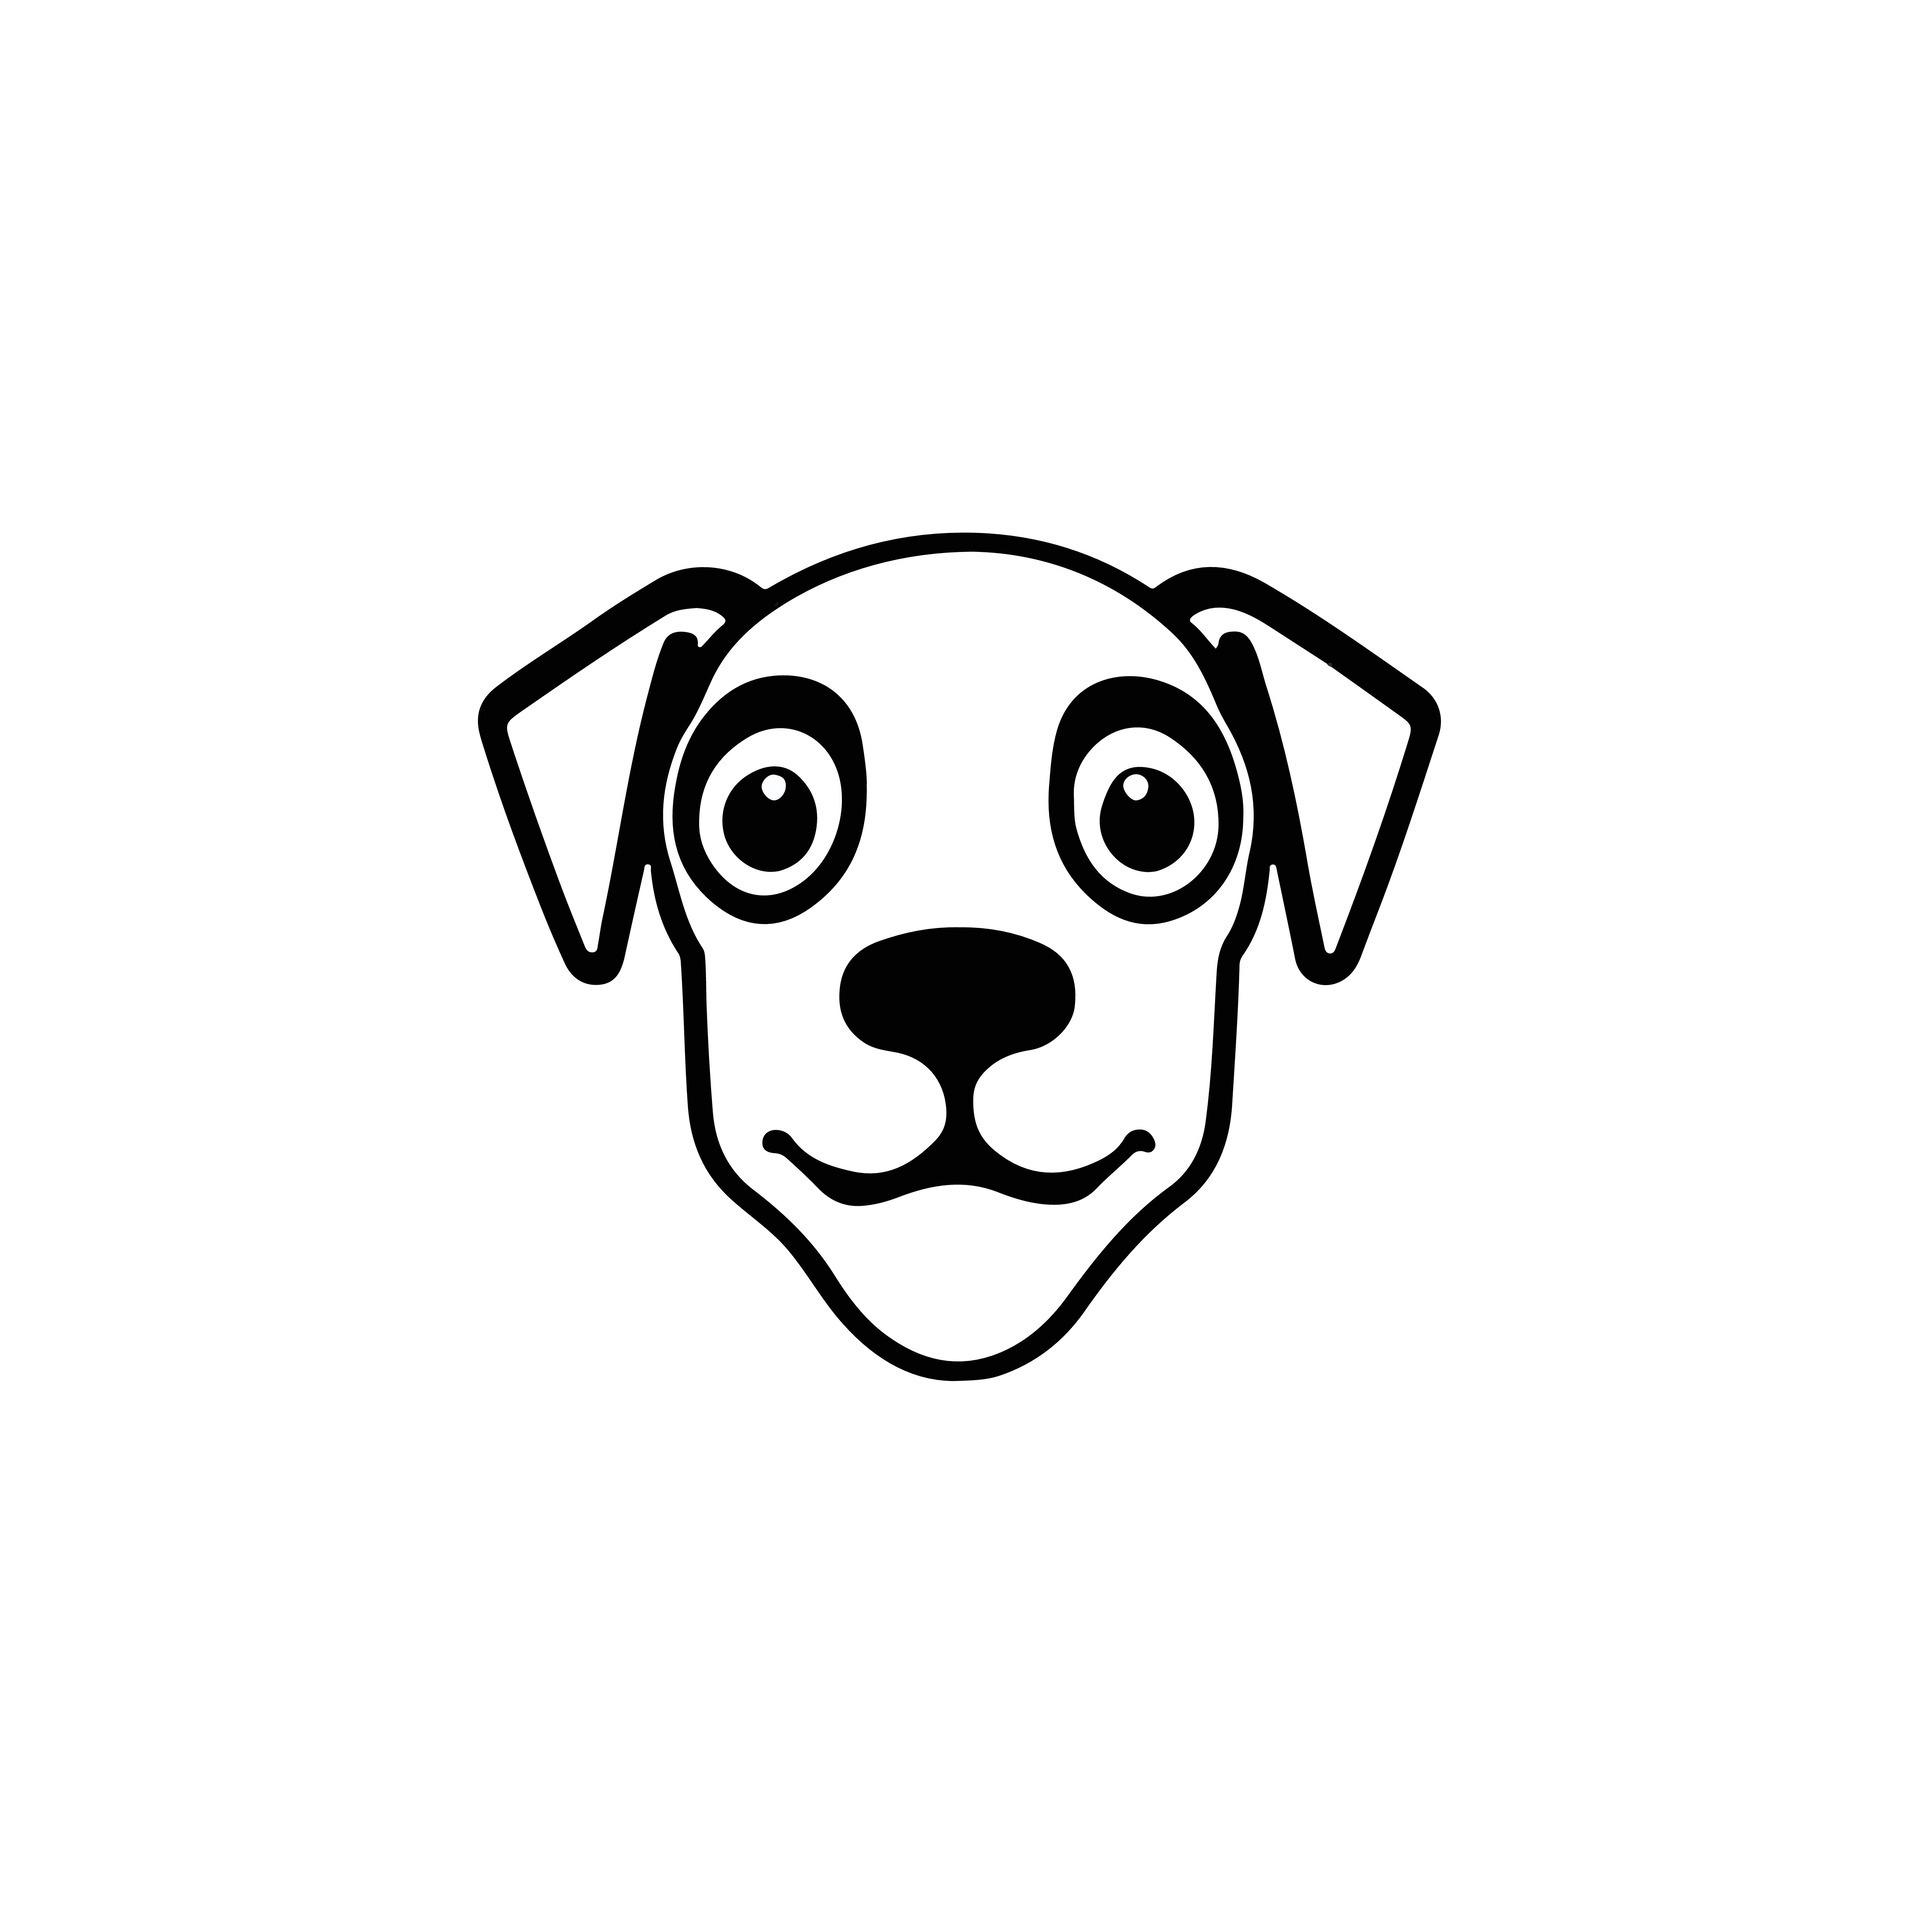 Dog head icon, dog face sign, dog face icon in line art, Vector ...